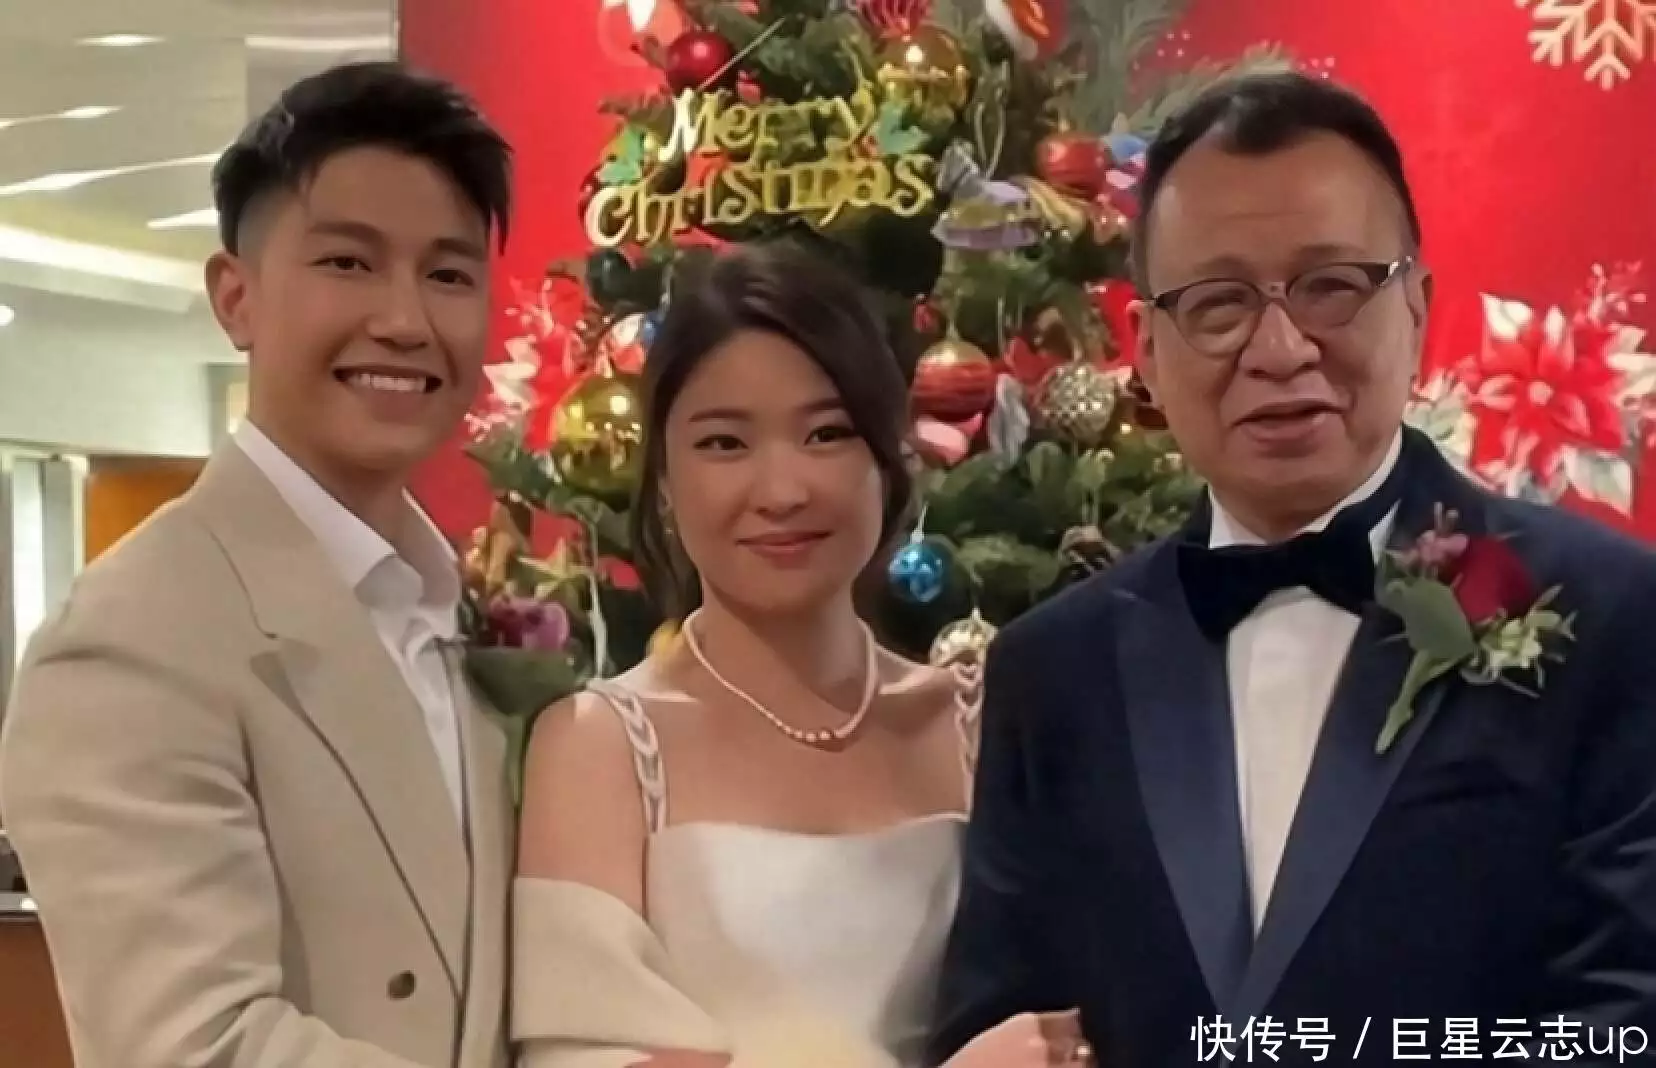 TVB's well -known old drama bone daughter is married, open 30 tables of star gathers, and send 20 million luxury homes as dowry broadcast articles